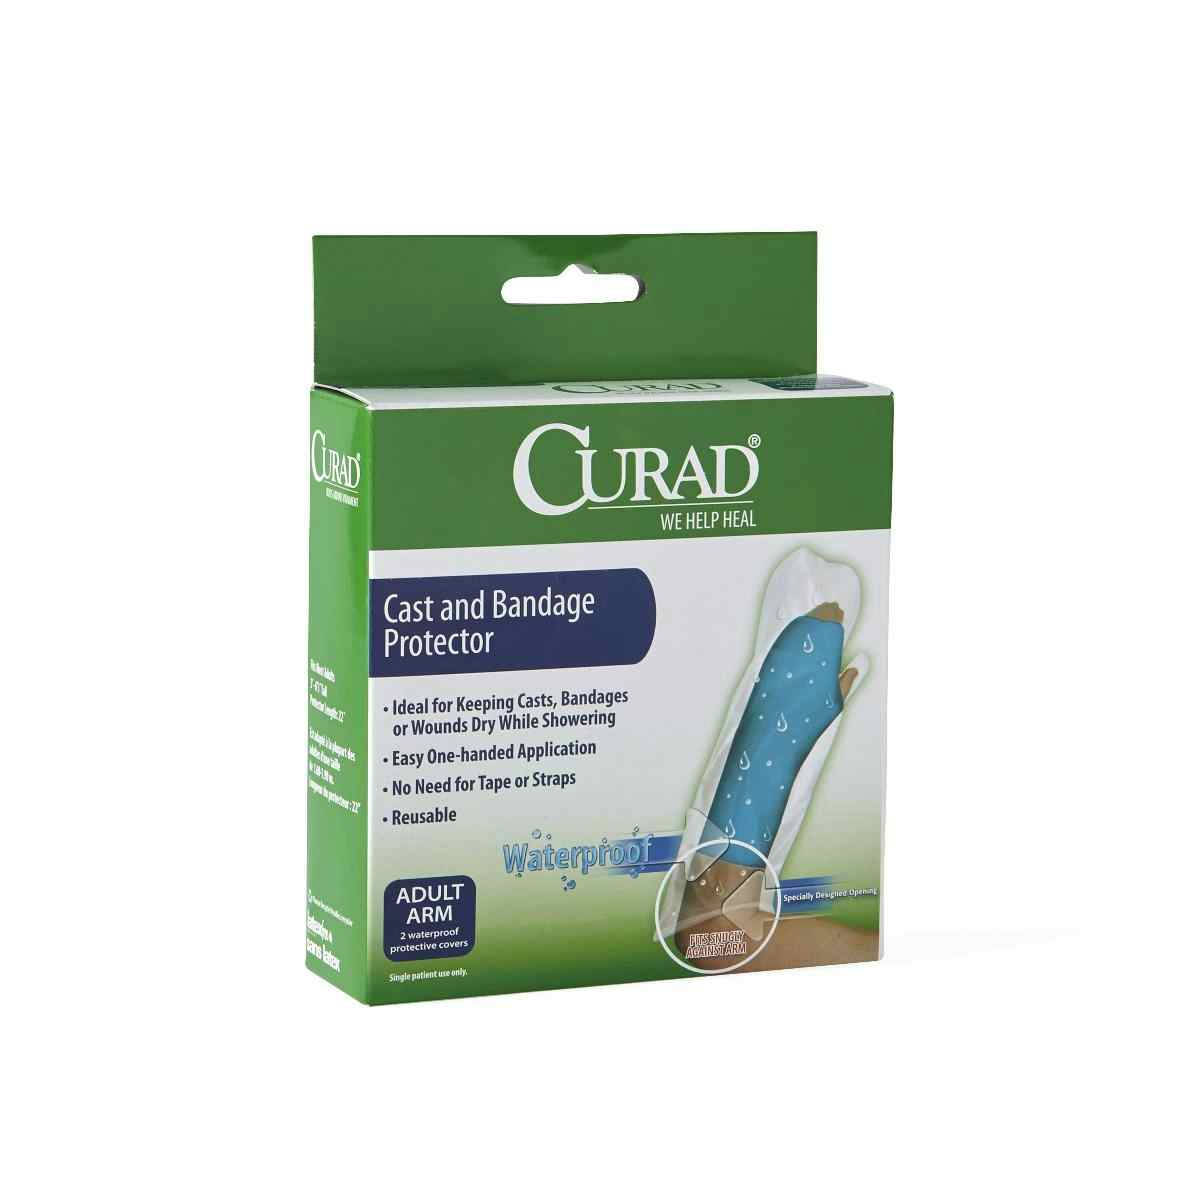 Curad Cast and Bandage Protector for Arms , CUR200AAAH, Adult Arm Size - 1 Box